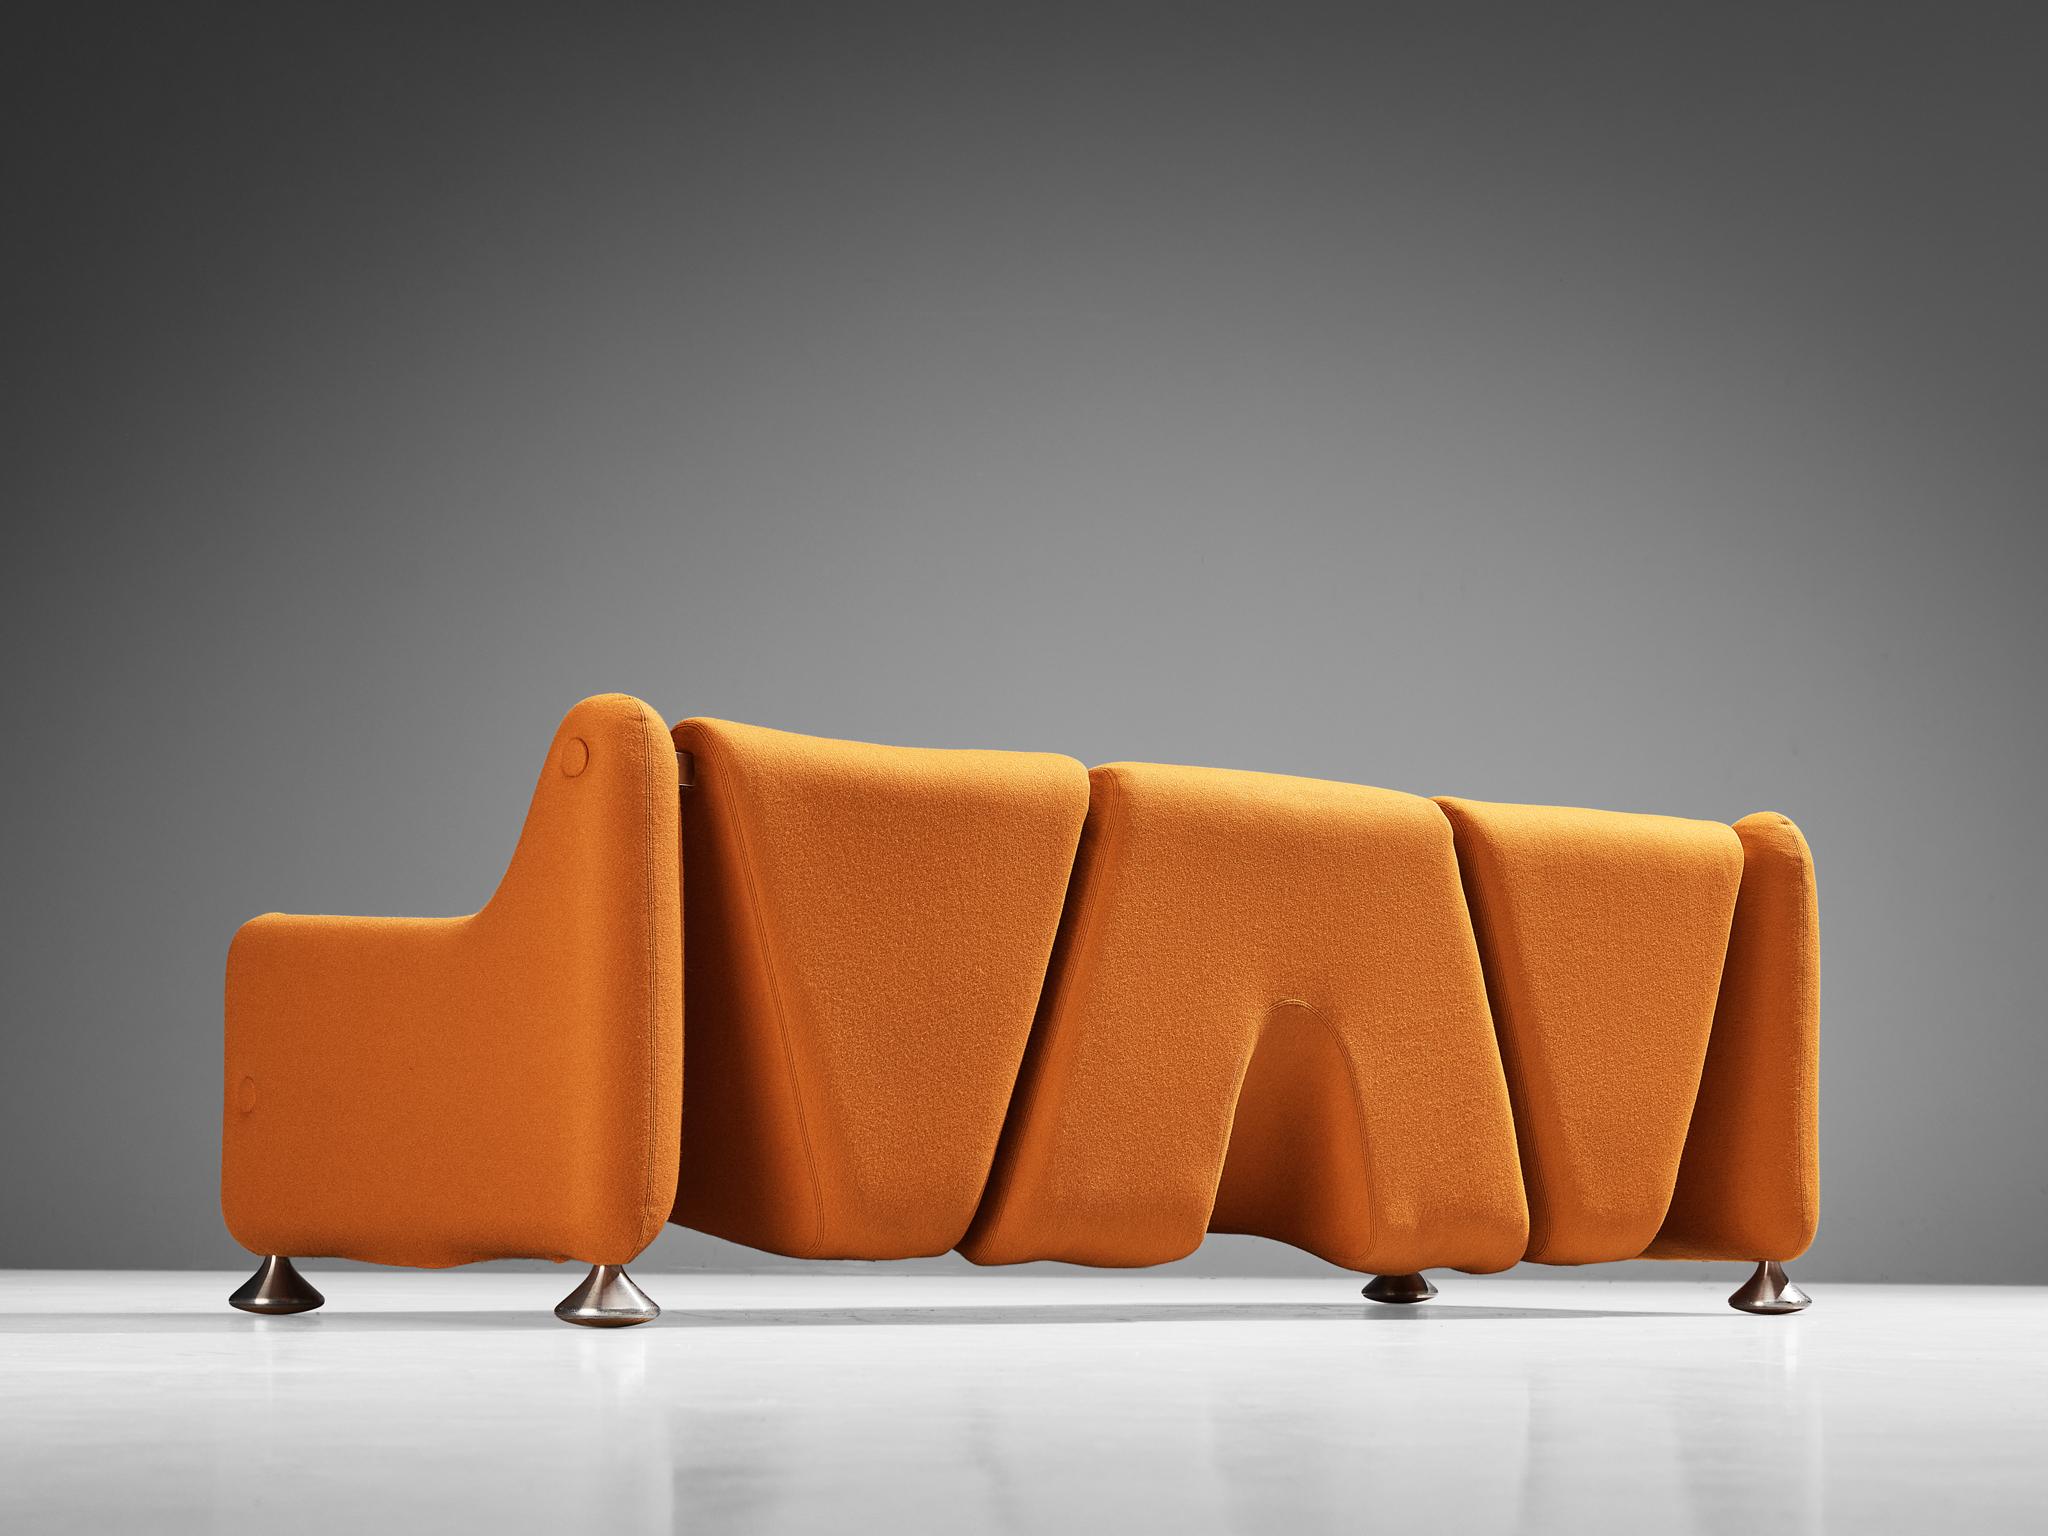 Luigi Colani for Fritz Hansen, sofa, chrome-plated steel, metal, orange fabric, Denmark, 1970s

The German industrial designer Luigi Colani was renowned for incorporating organic shapes inspired by nature into cutting-edge creations such as